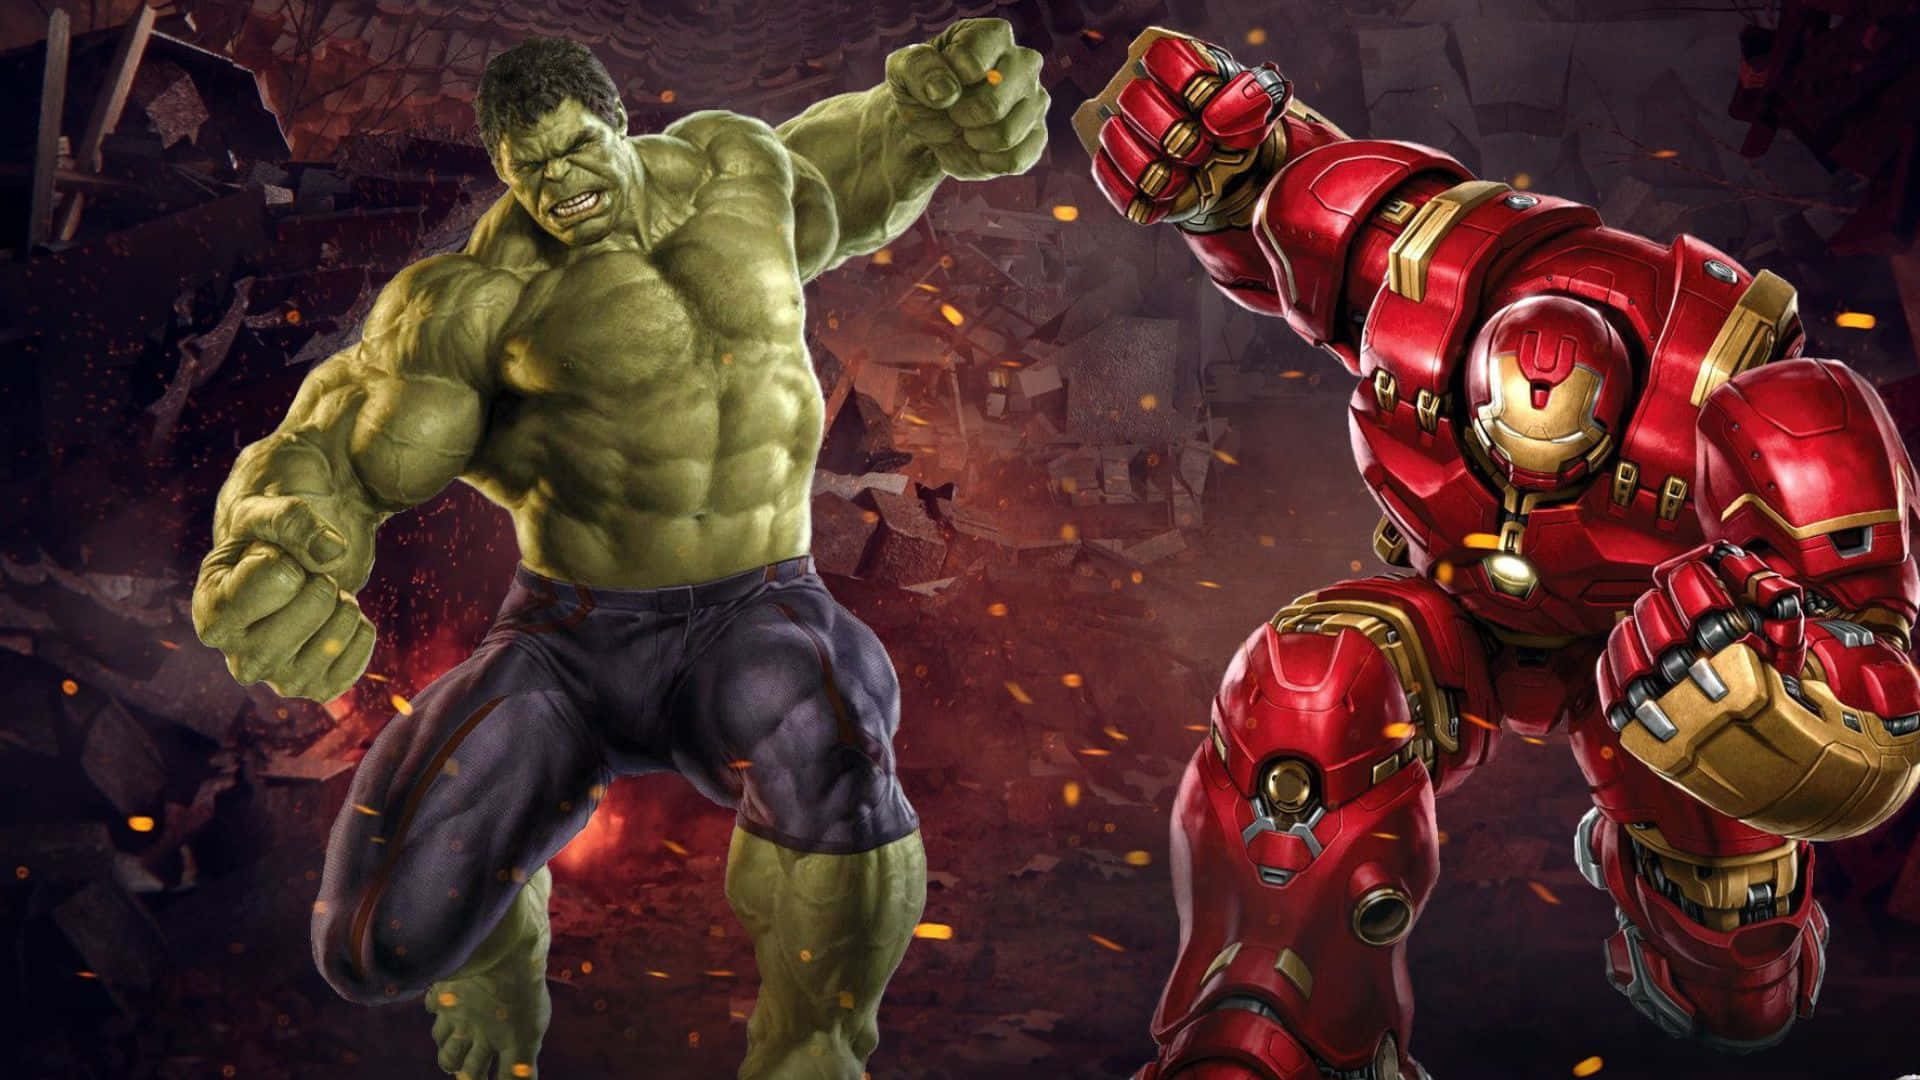 Iron Man and The Incredible Hulk face off in a epic Marvel match!" Wallpaper